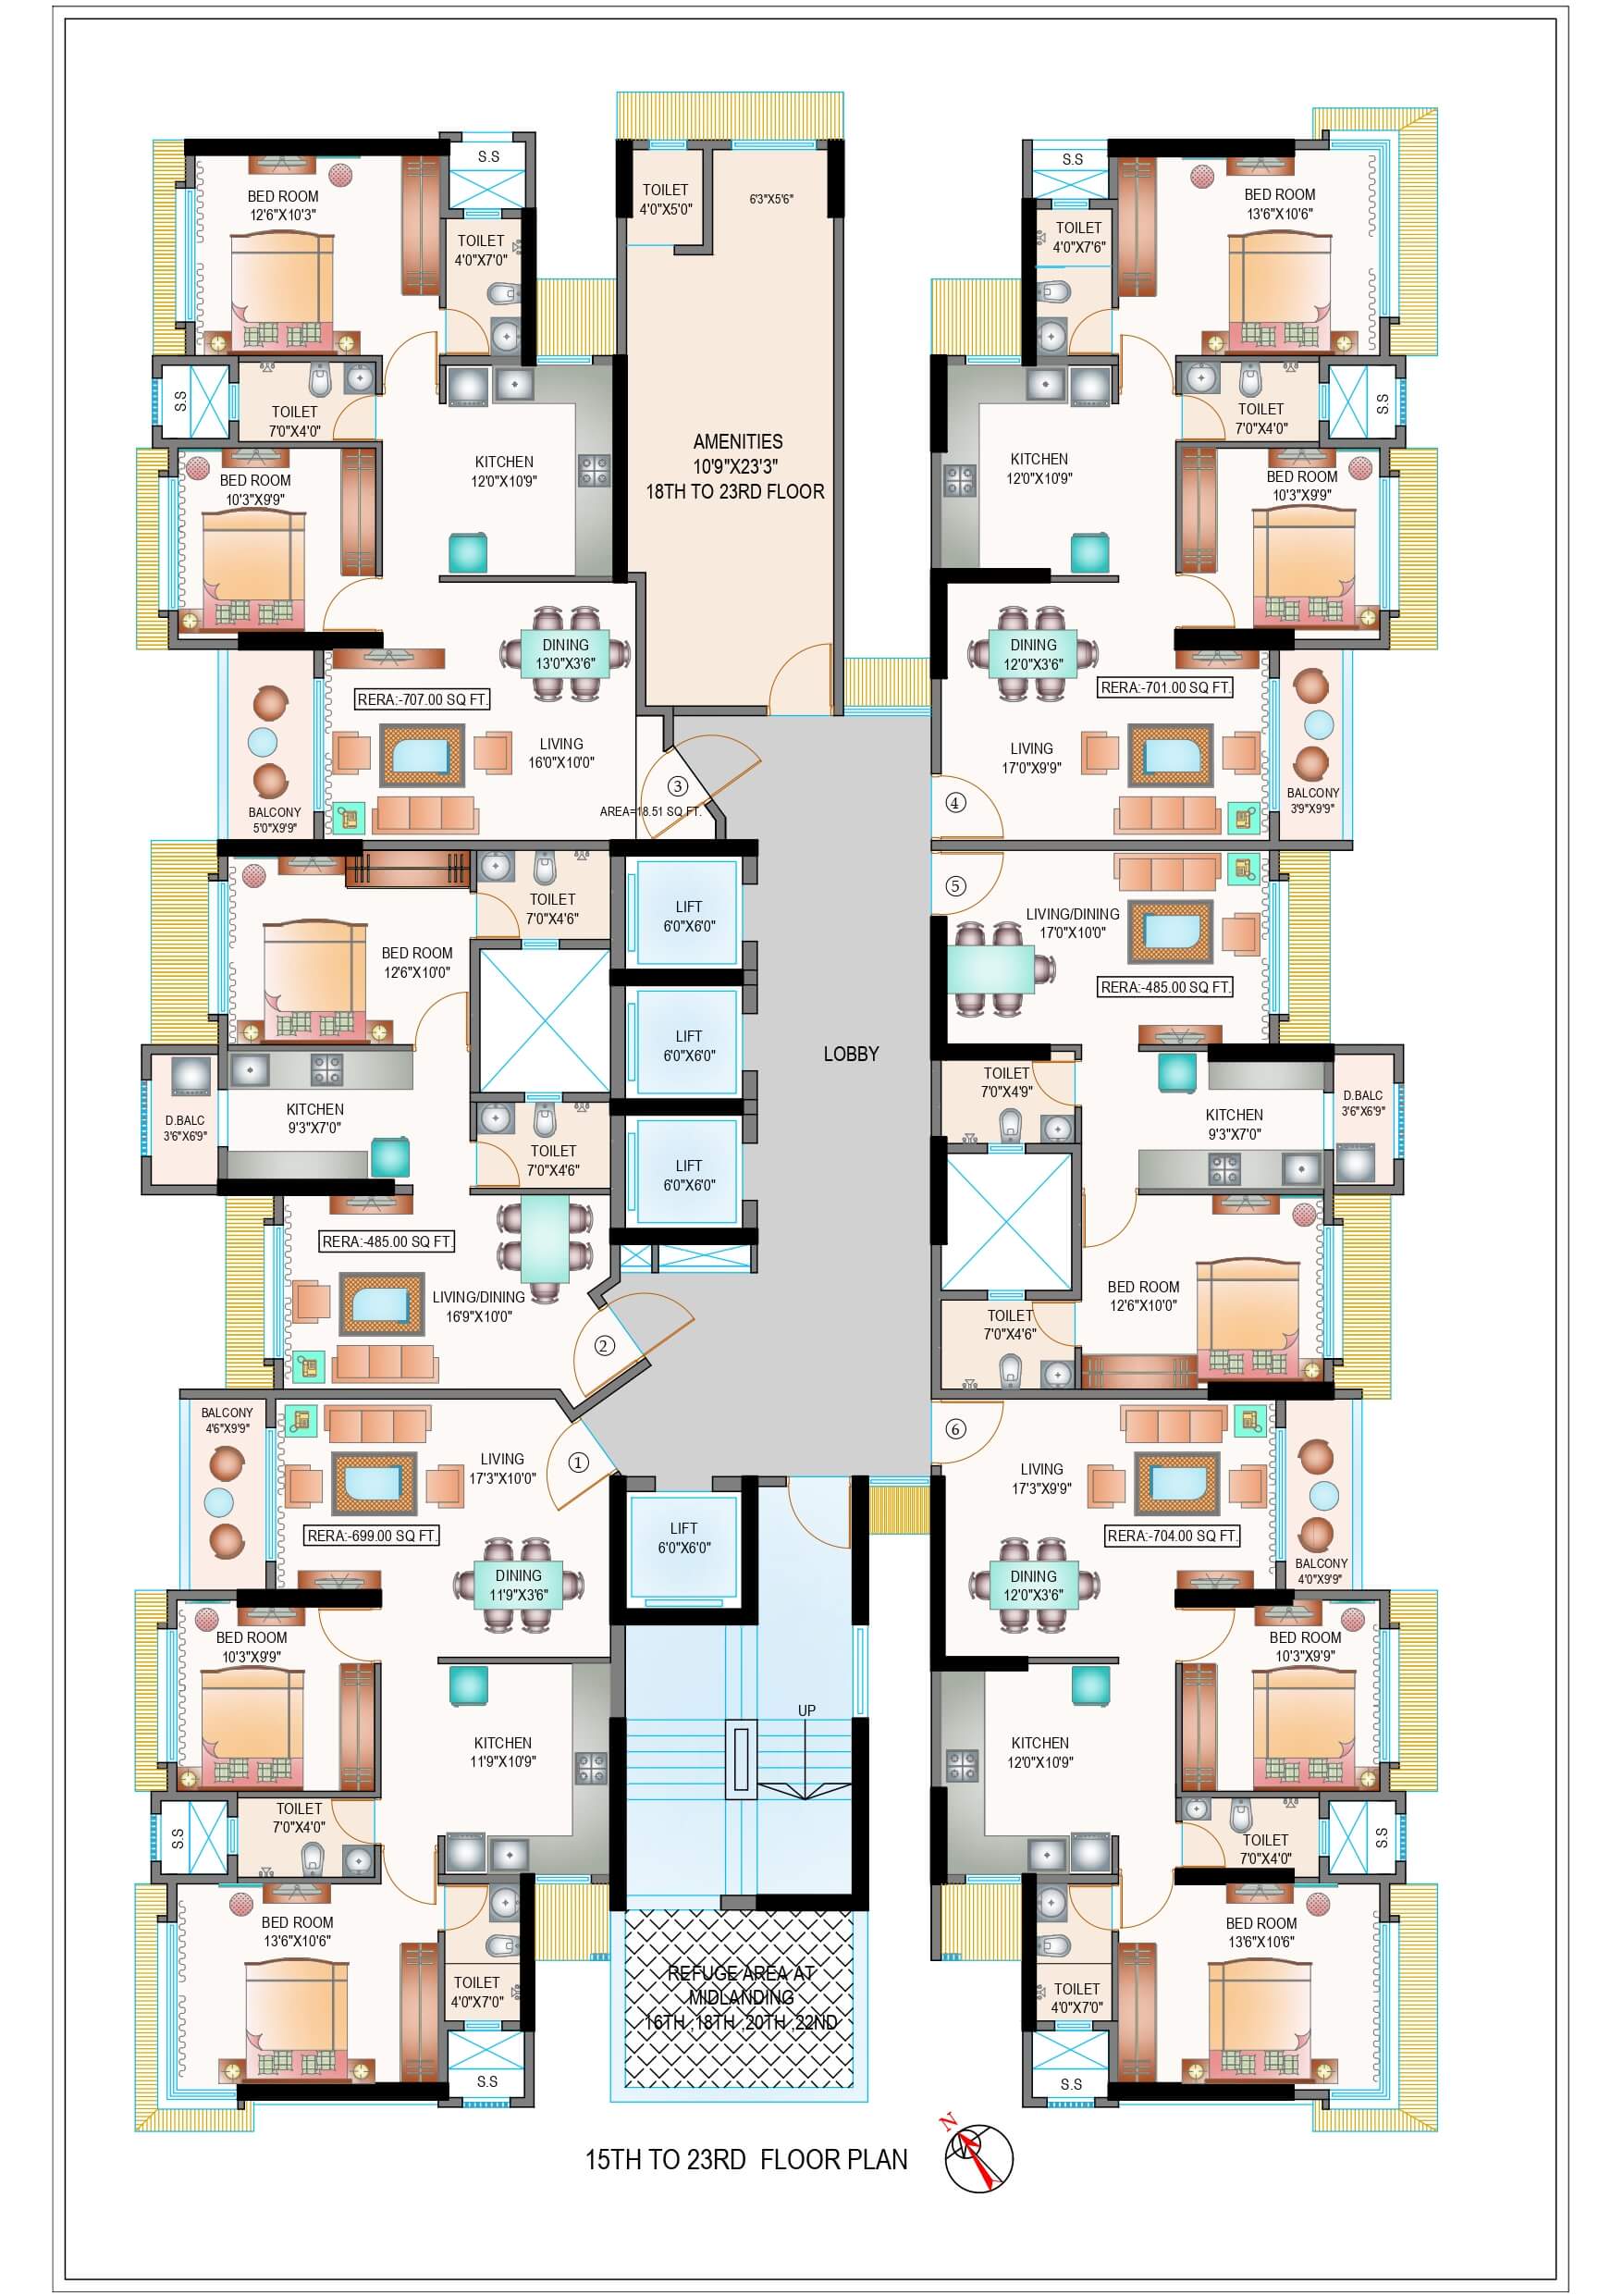 15TH_TO_23RD_FLOOR PLAN